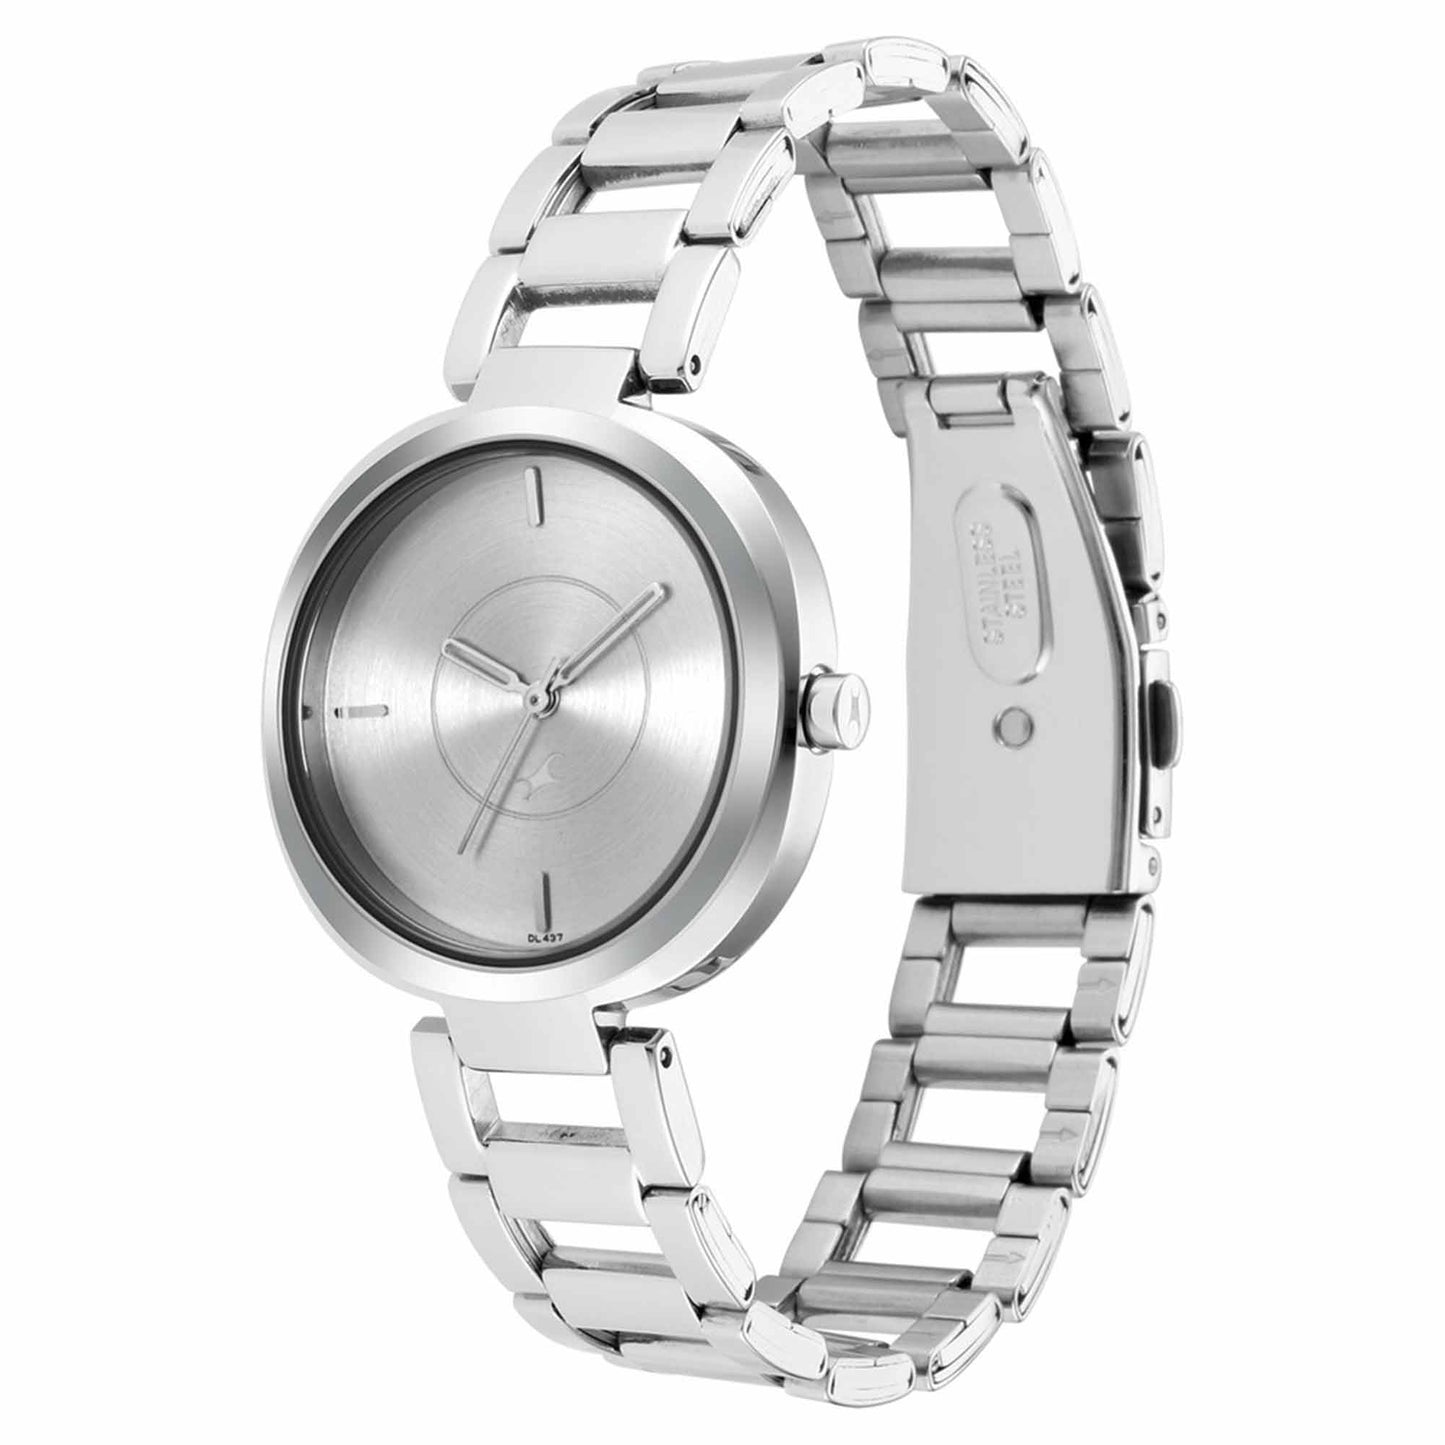 Fastrack Stunners Quartz Analog Silver Dial Metal Strap Watch for Girls